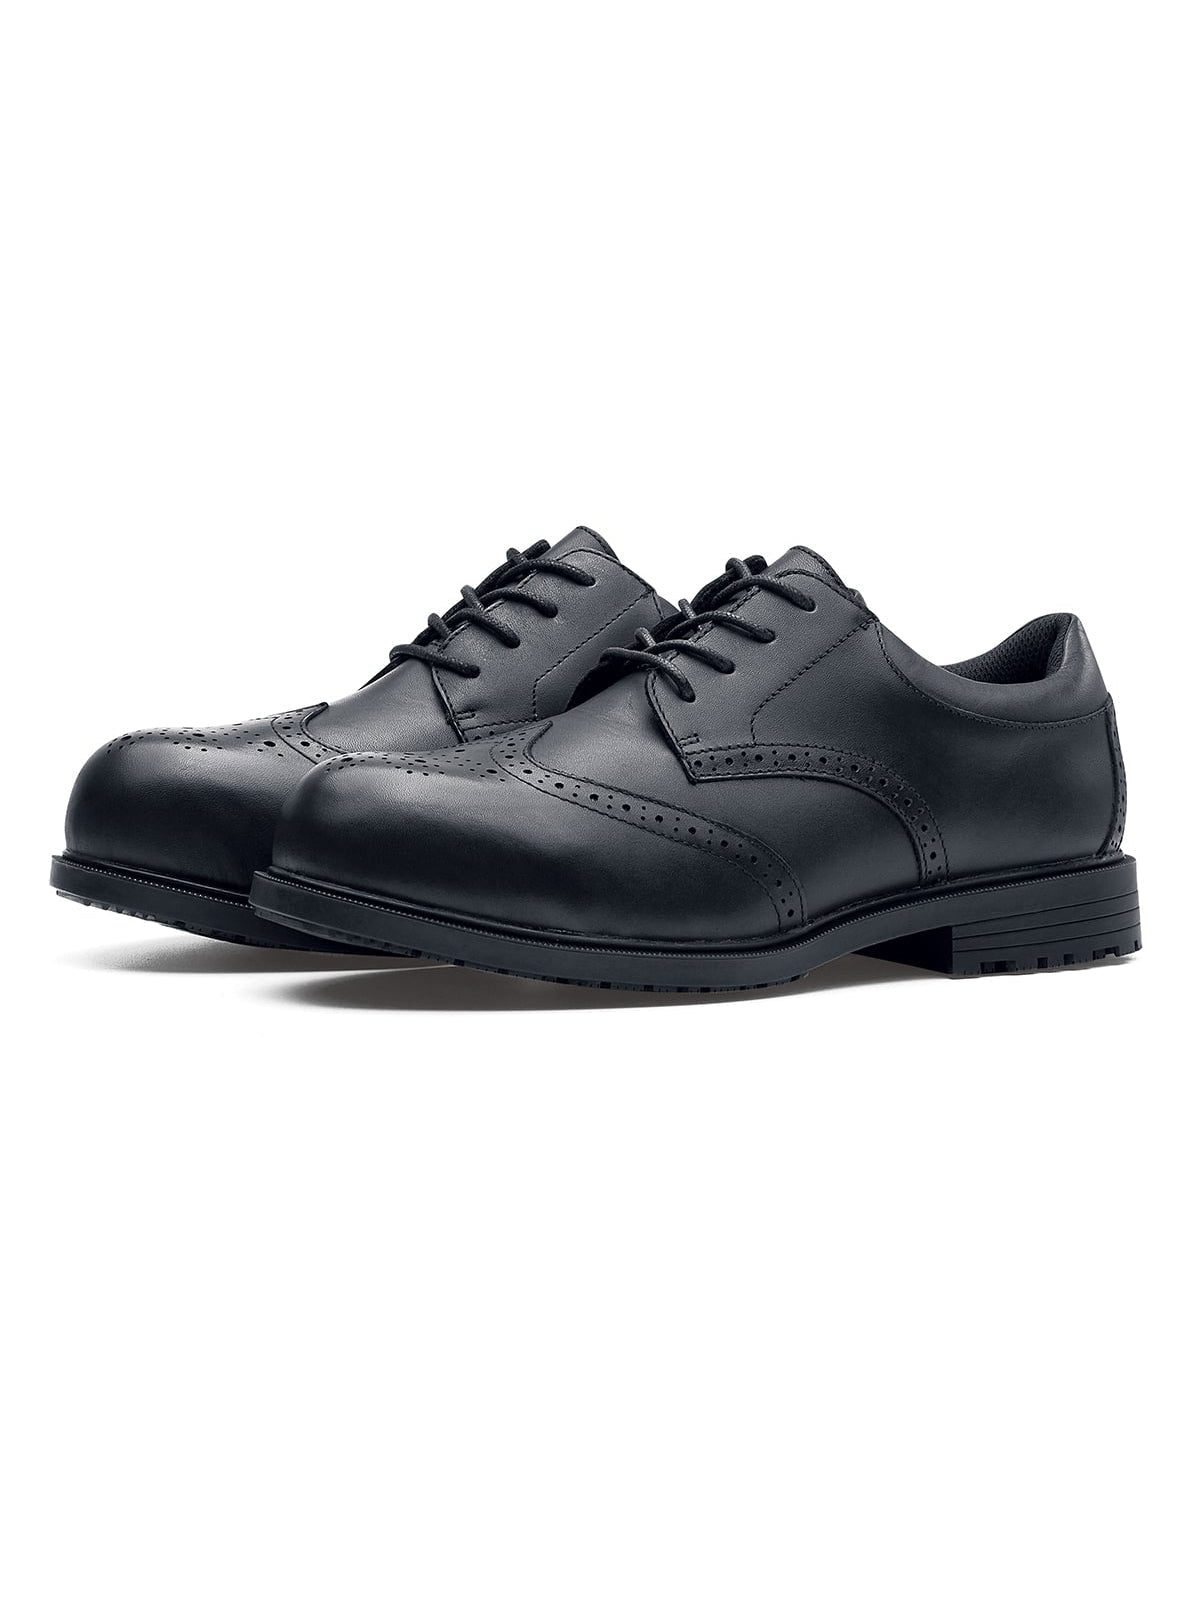 Men's Work Shoe Executive Wing Tip II (S2) by Shoes For Crews -  ChefsCotton